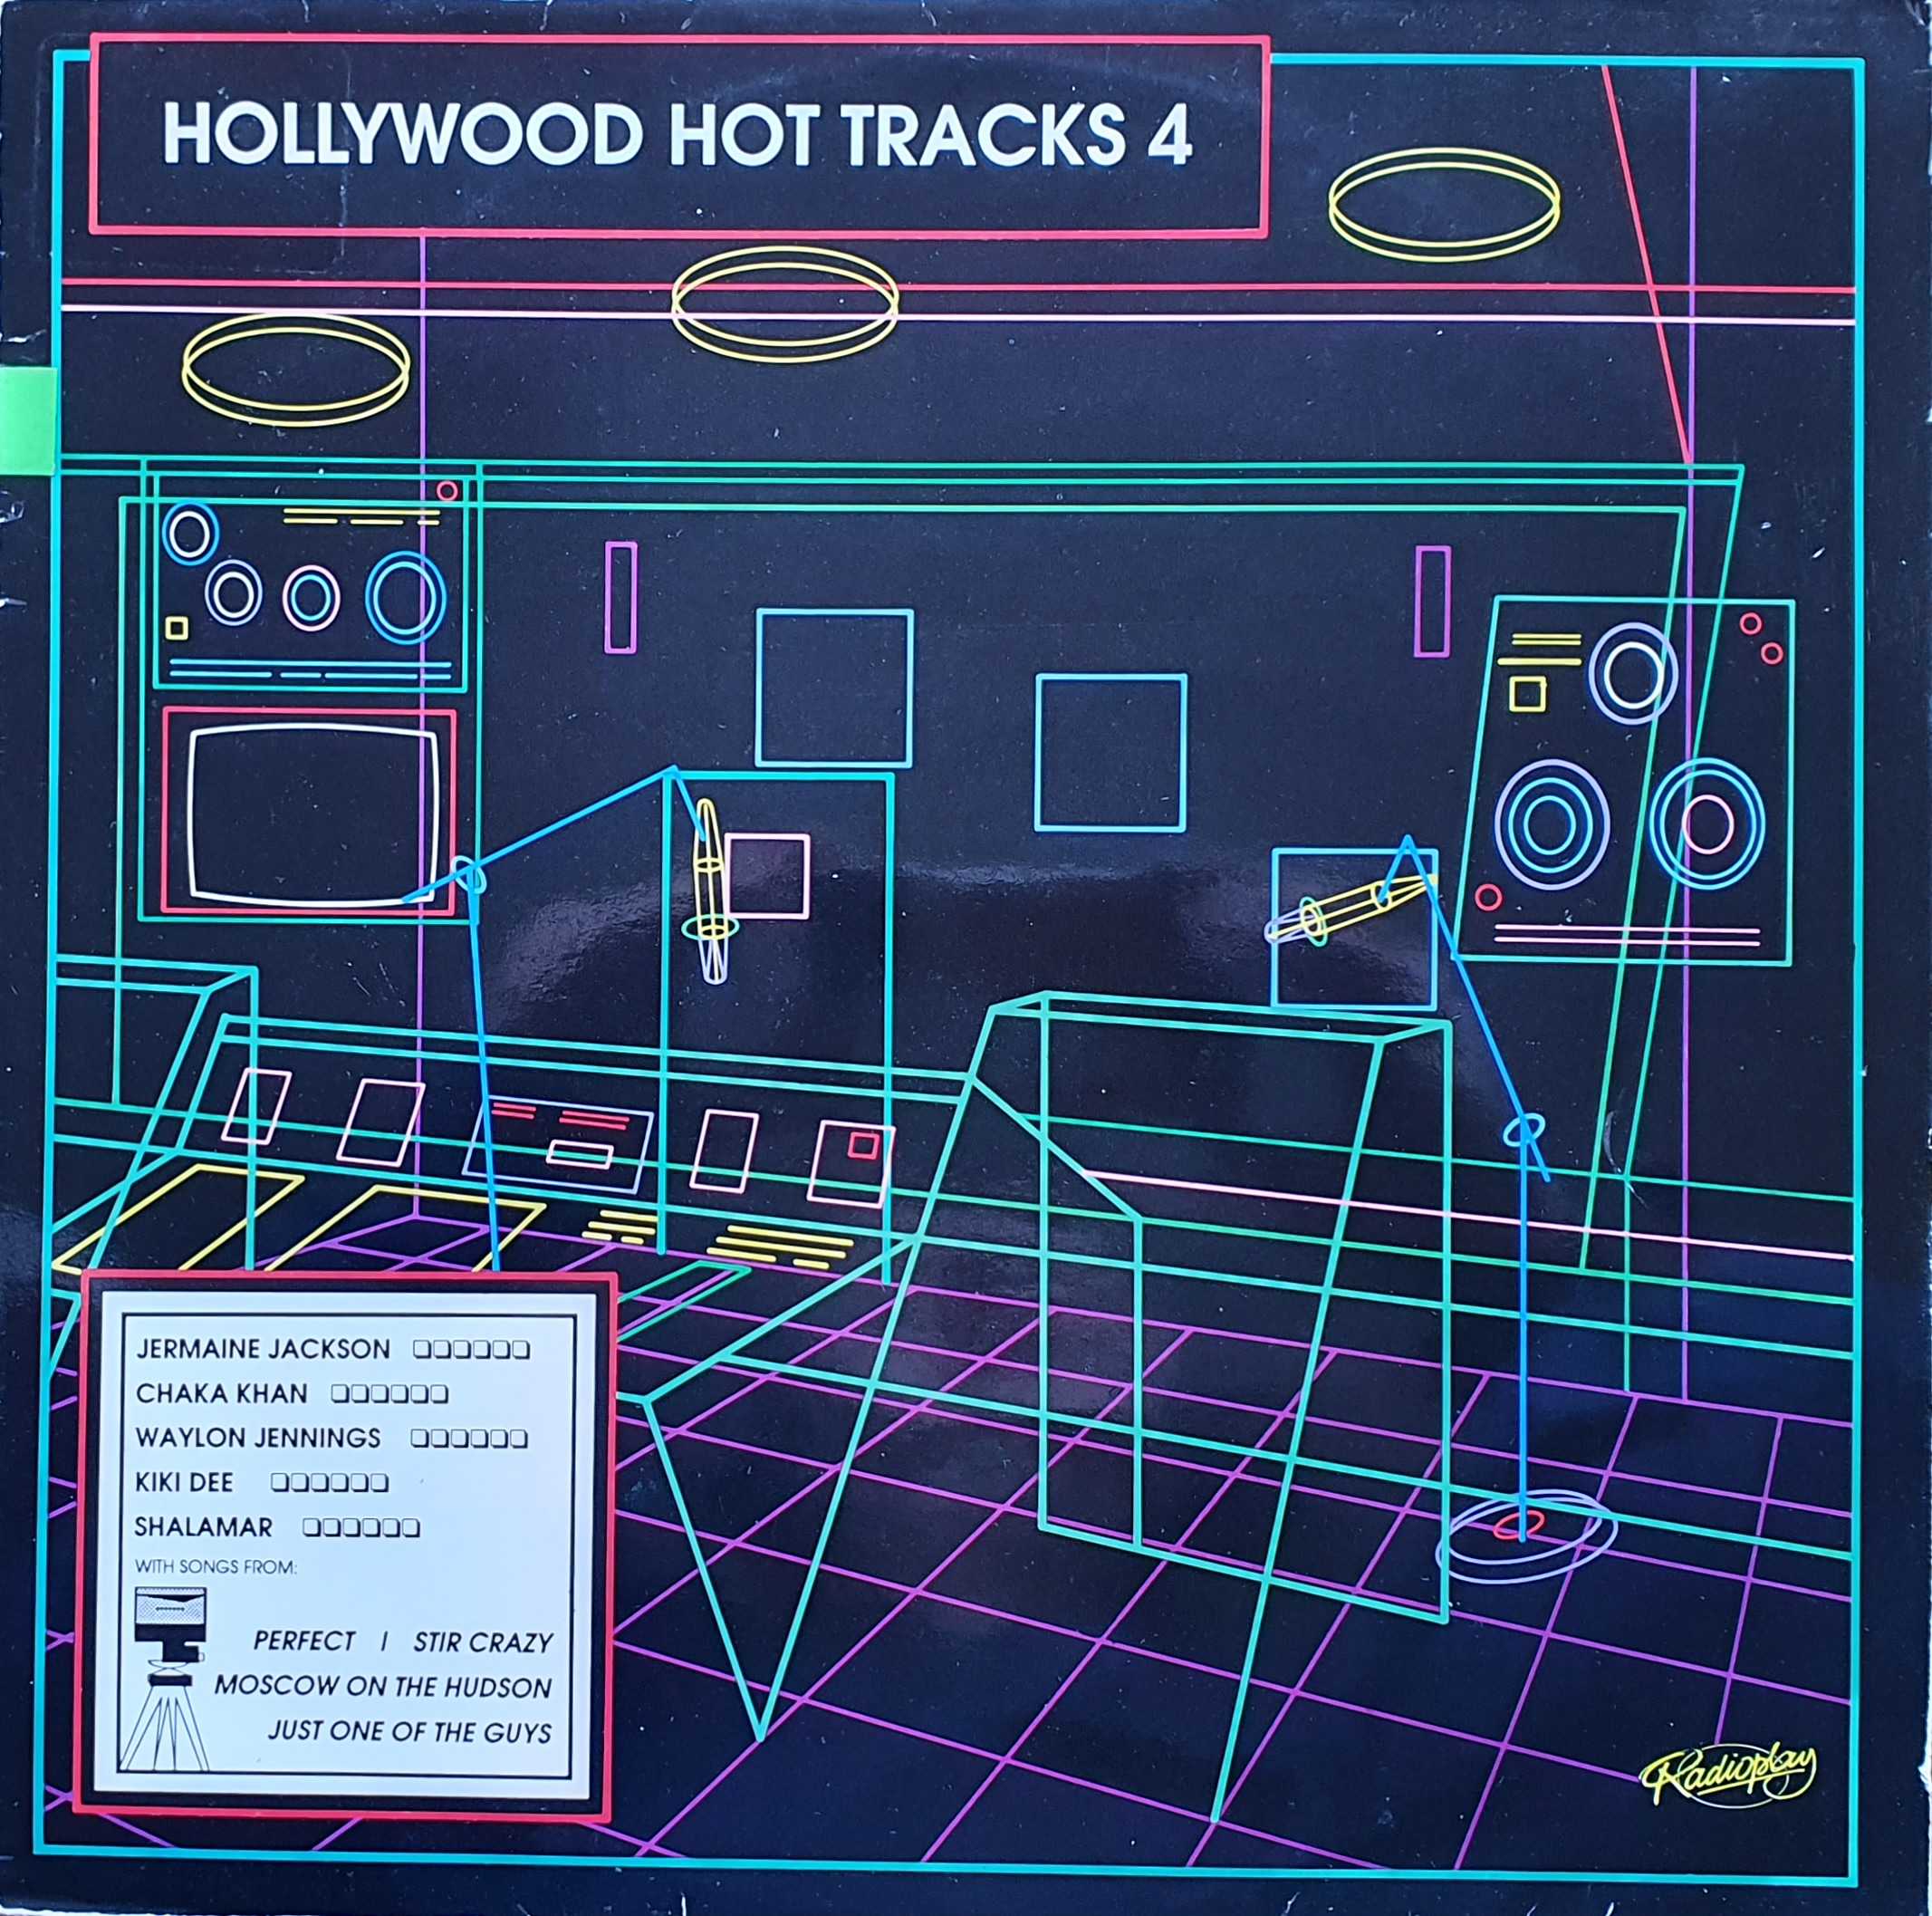 Picture of TAIR 87002 Hollywood hot tracks 4 by artist Various from the BBC albums - Records and Tapes library